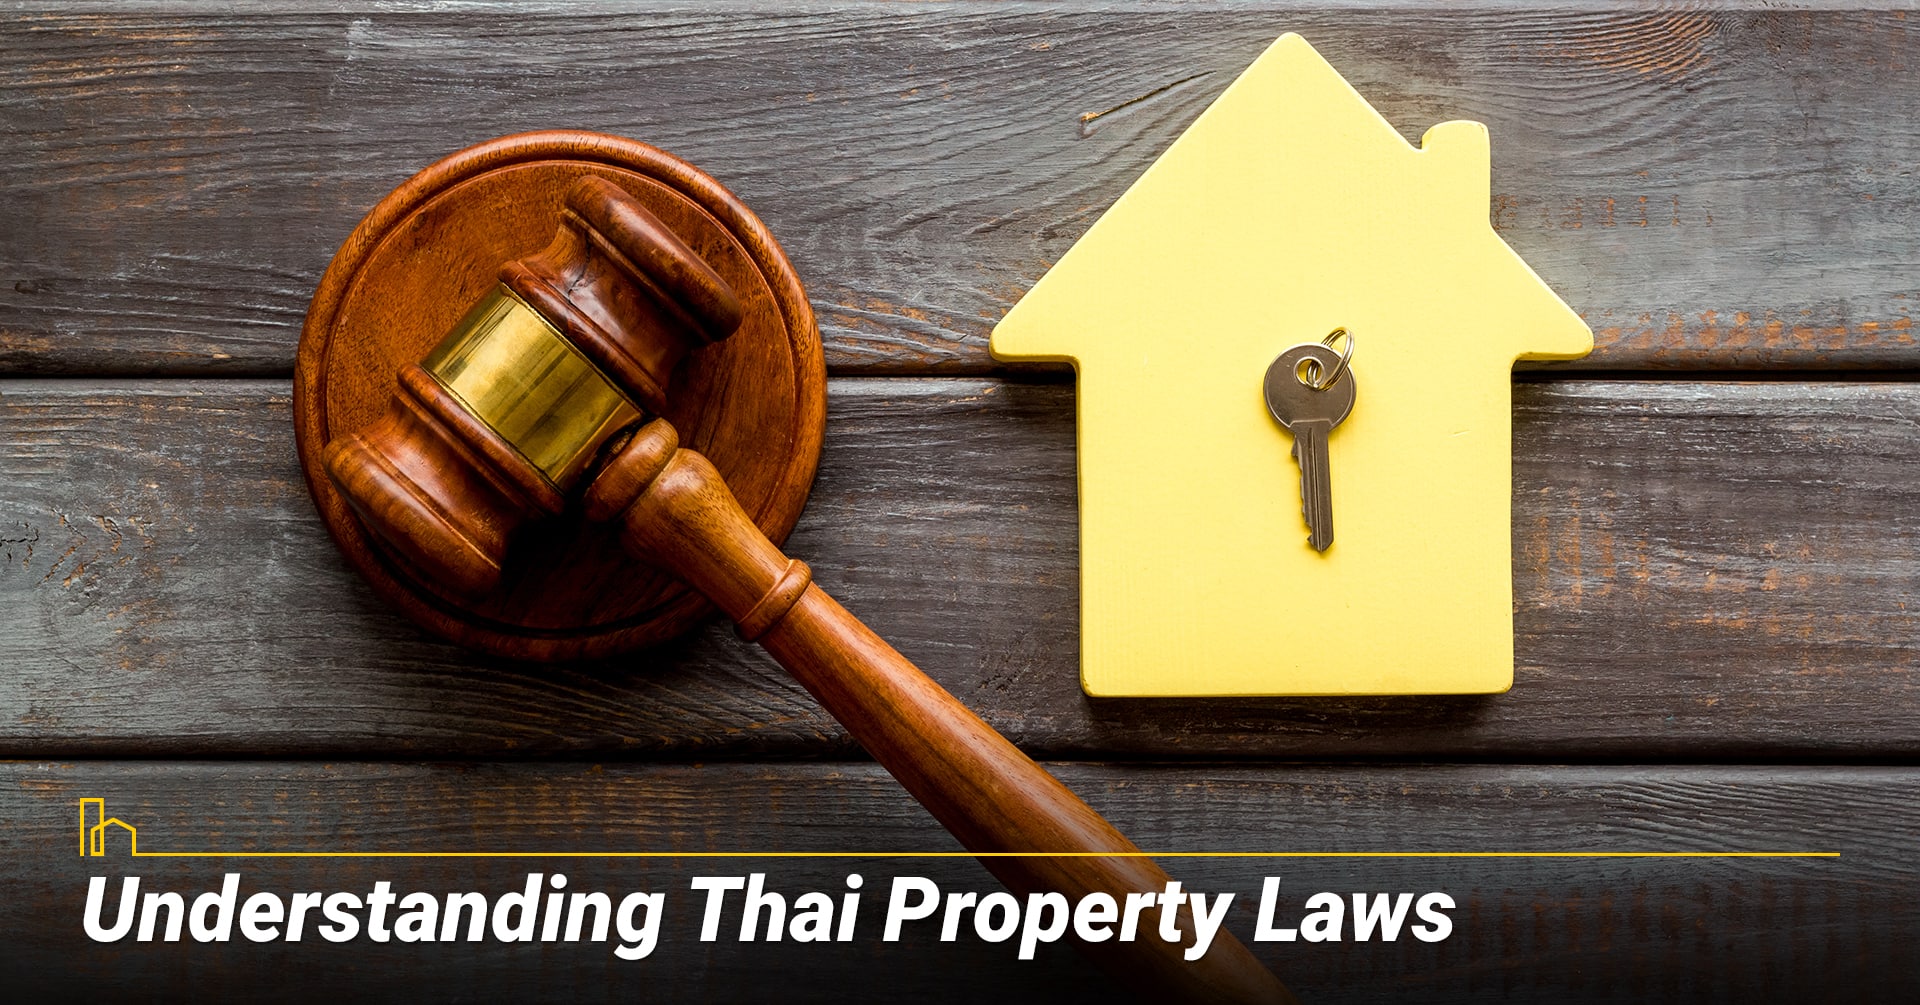 5 Things You Should Know Before Buying a House in Thailand